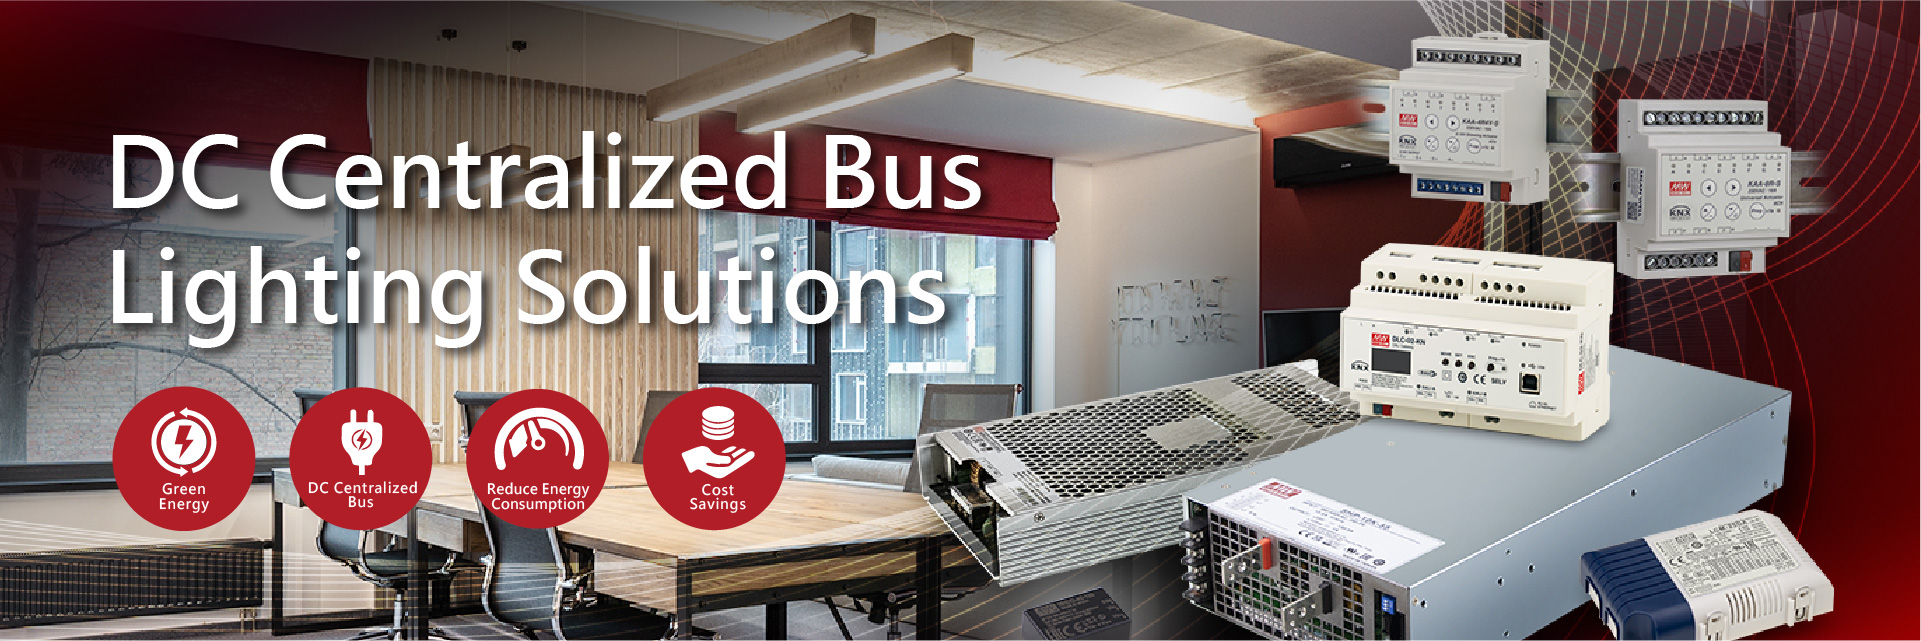 MEAN WELL DC Centralized Bus Lighting Solutions